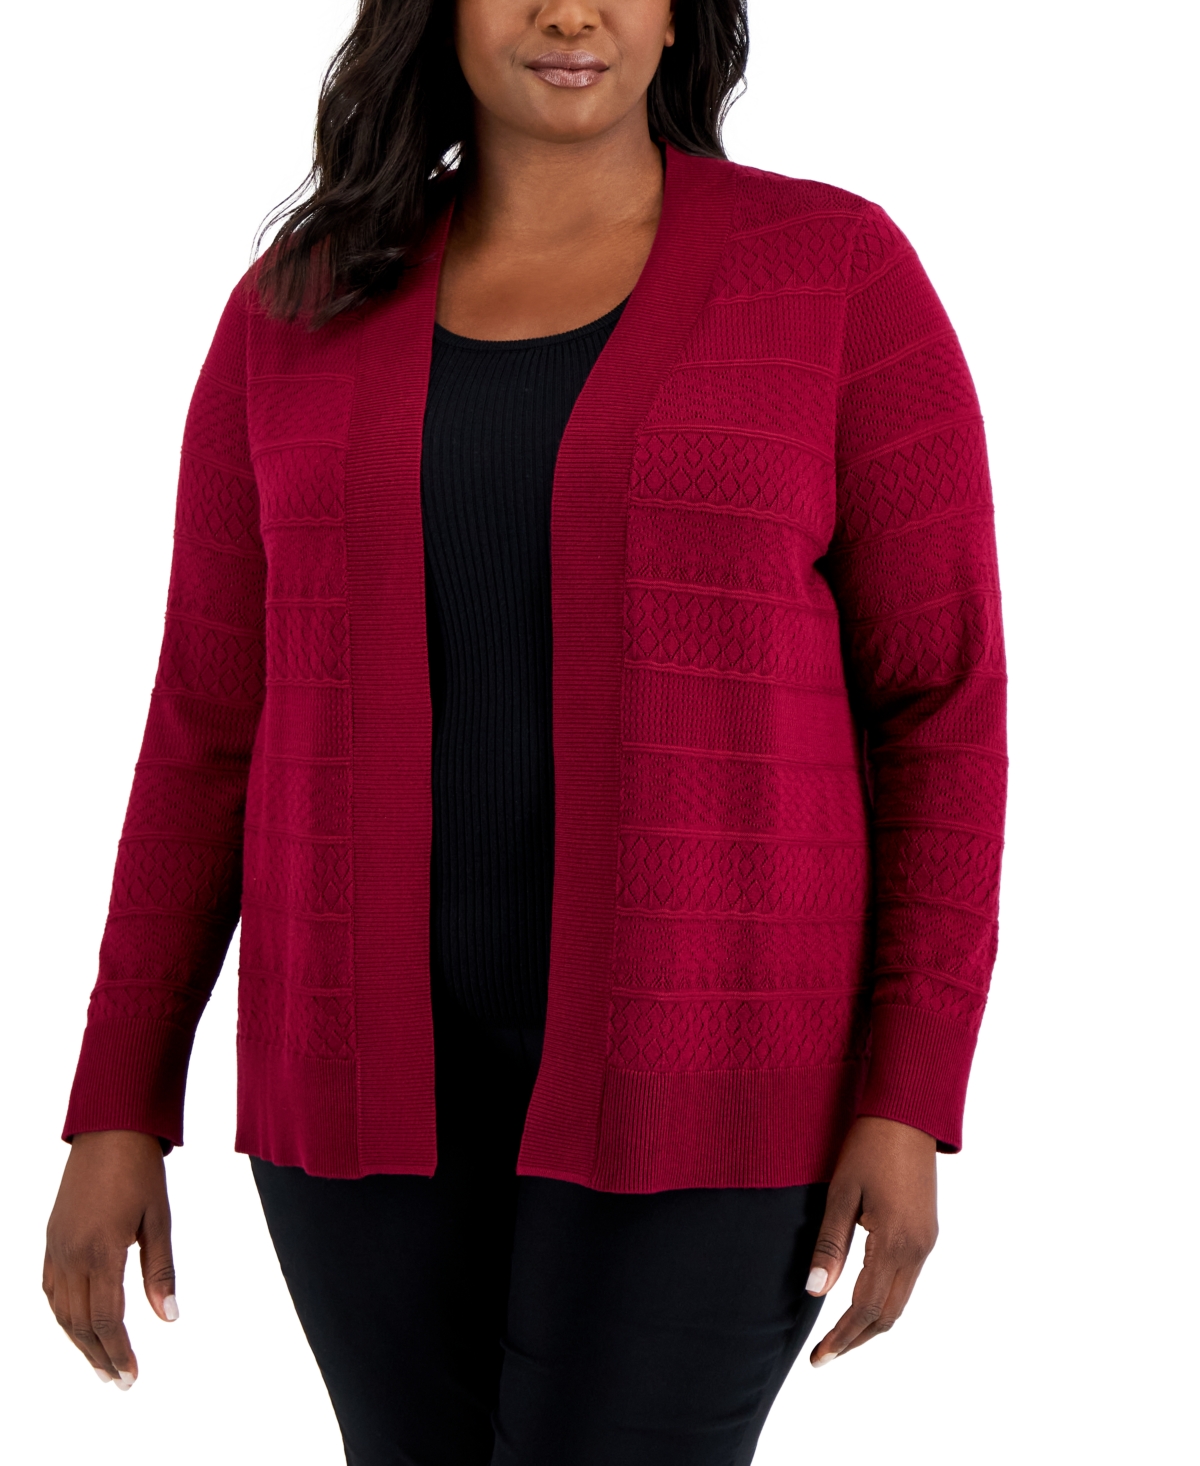 Plus Size Pointelle Cardigan, Created for Macy's - Merlot